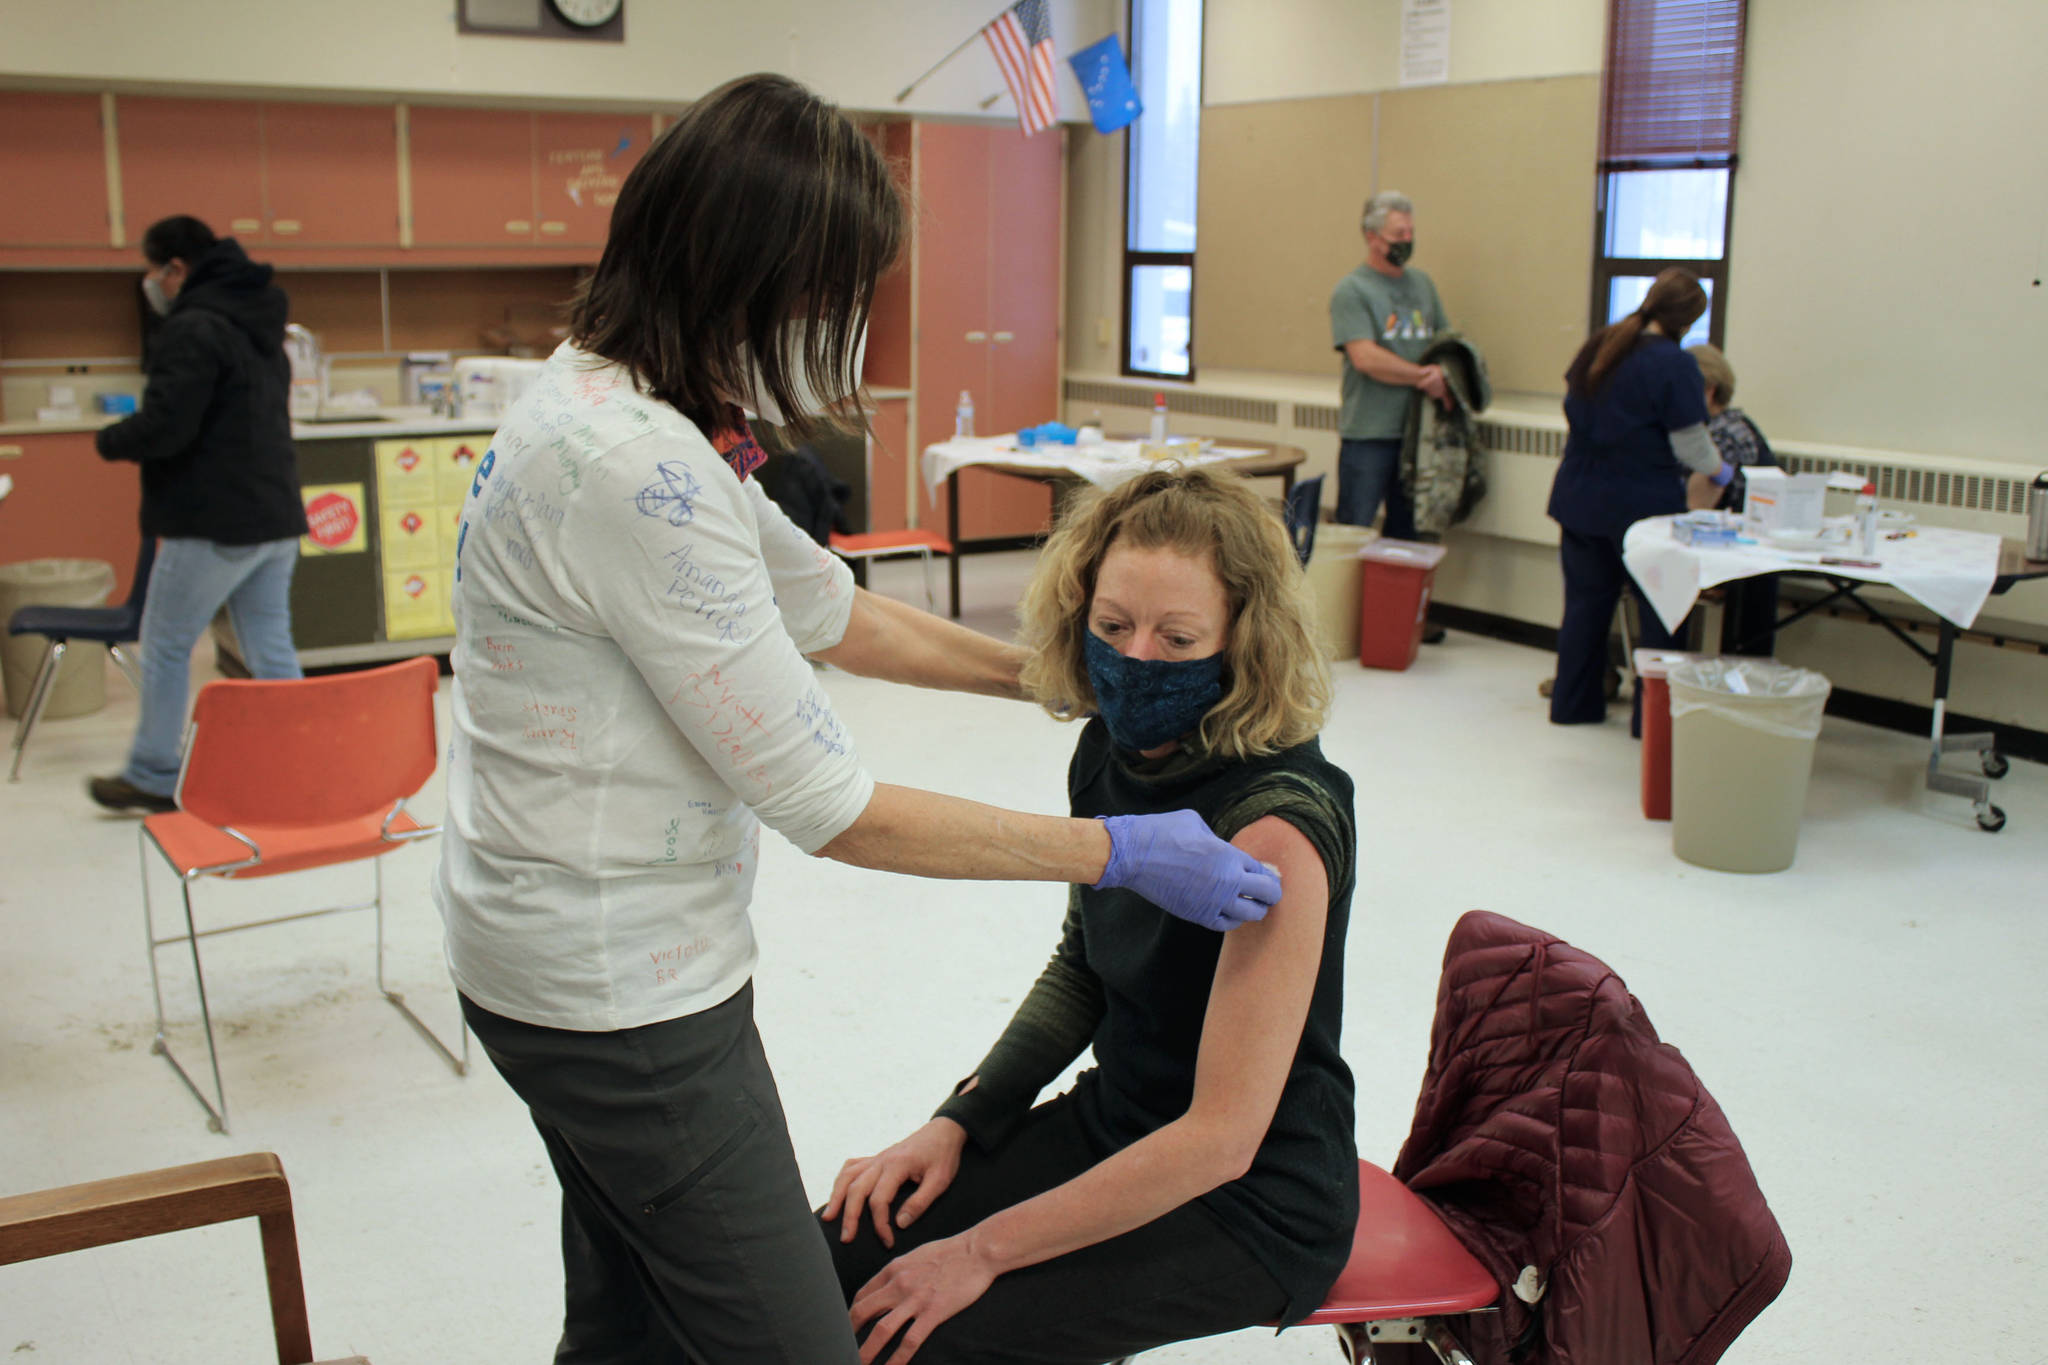 Tracy Silta (left) administers a dose of a COVID-19 vaccine to Melissa Linton during a vaccine clinic at Soldotna Prep School on Friday, Feb. 26 in Soldotna, Alaska. (Ashlyn O’Hara/Peninsula Clarion)